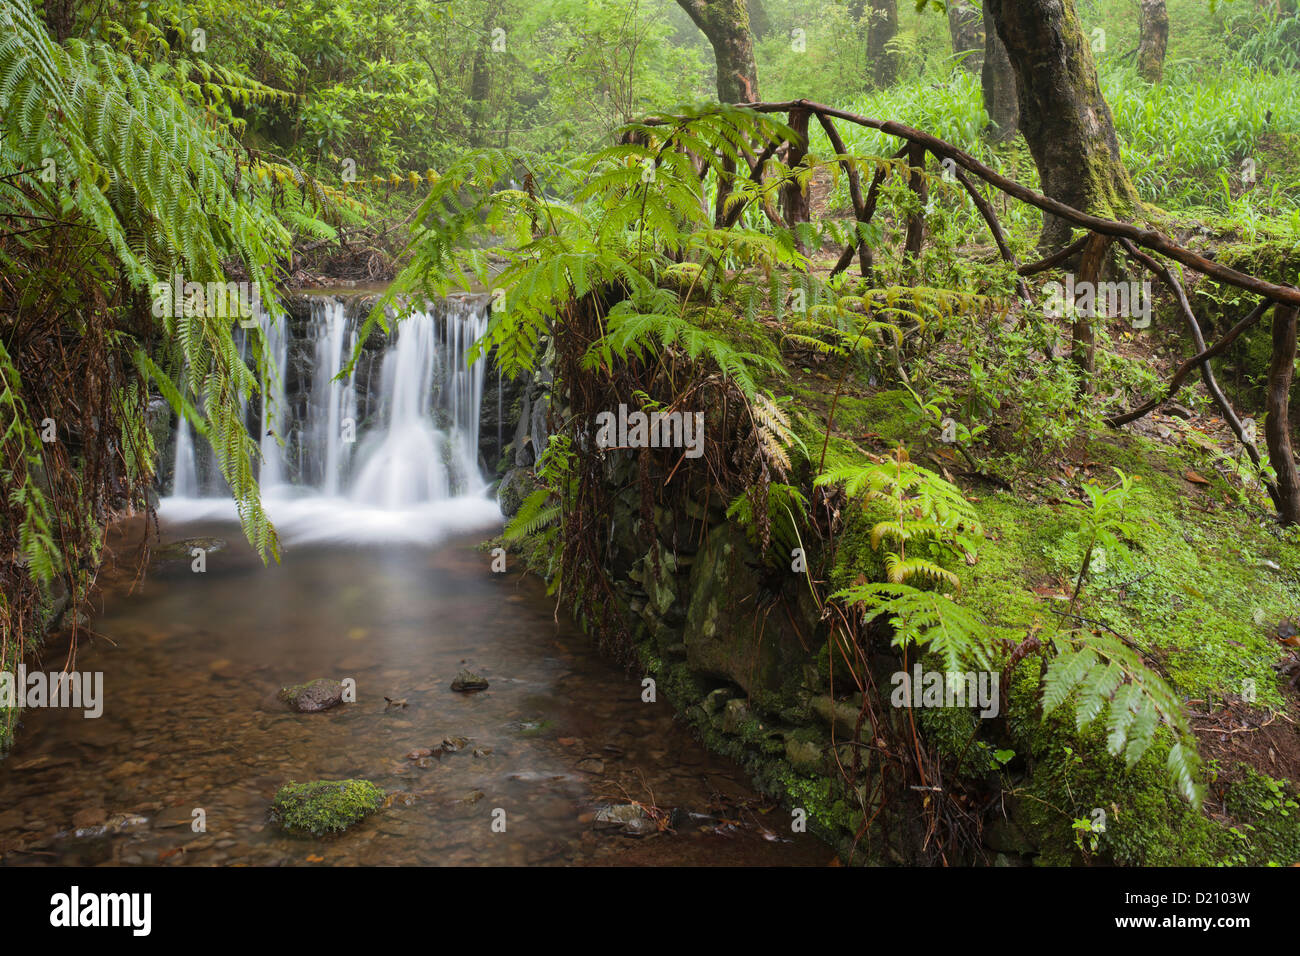 Waterfall with fern in the forest, Caldeirao Verde, Queimadas Forest Park, Madeira, Portugal Stock Photo